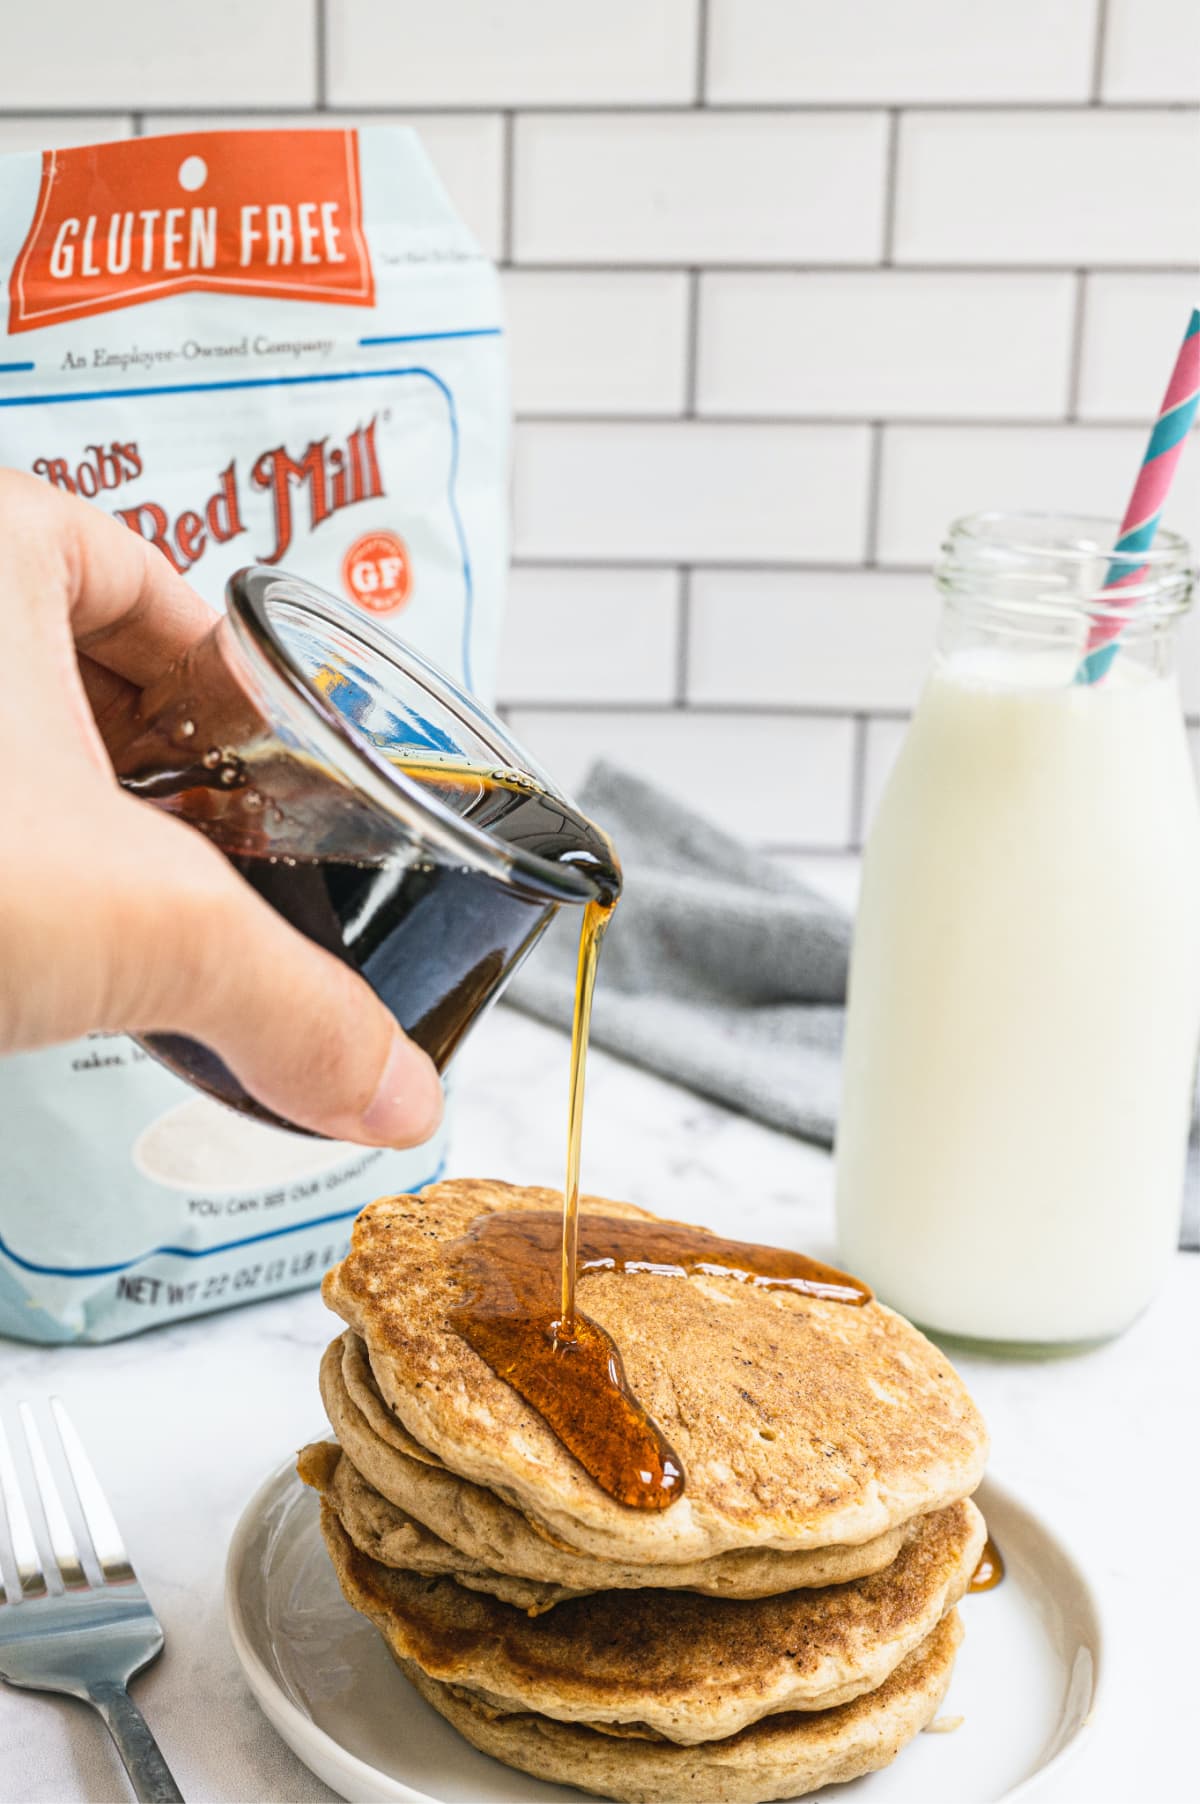 A person's hand pouring a glass container of syrup onto a stack of pancakes with a glass bottle of milk in the background.